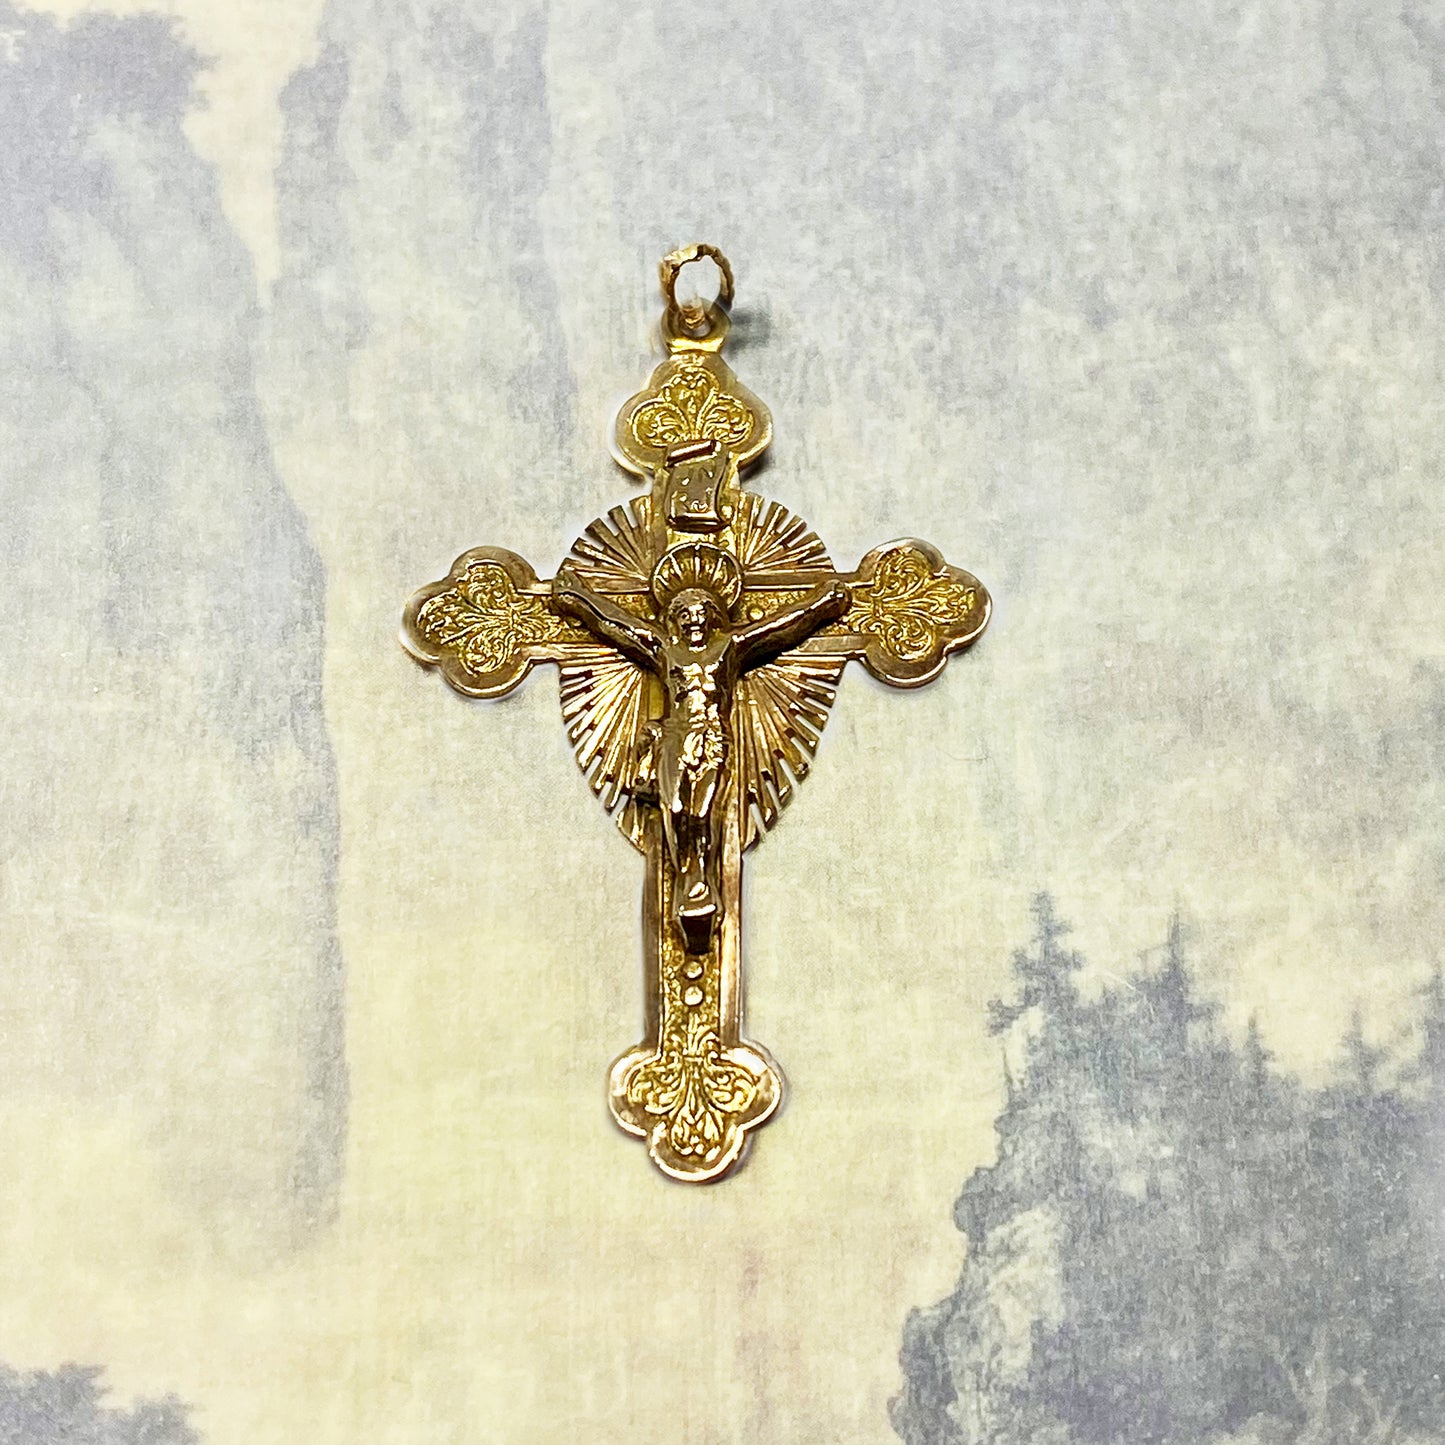 Antique 14k Gold Solid Victorian Cross - 1800s